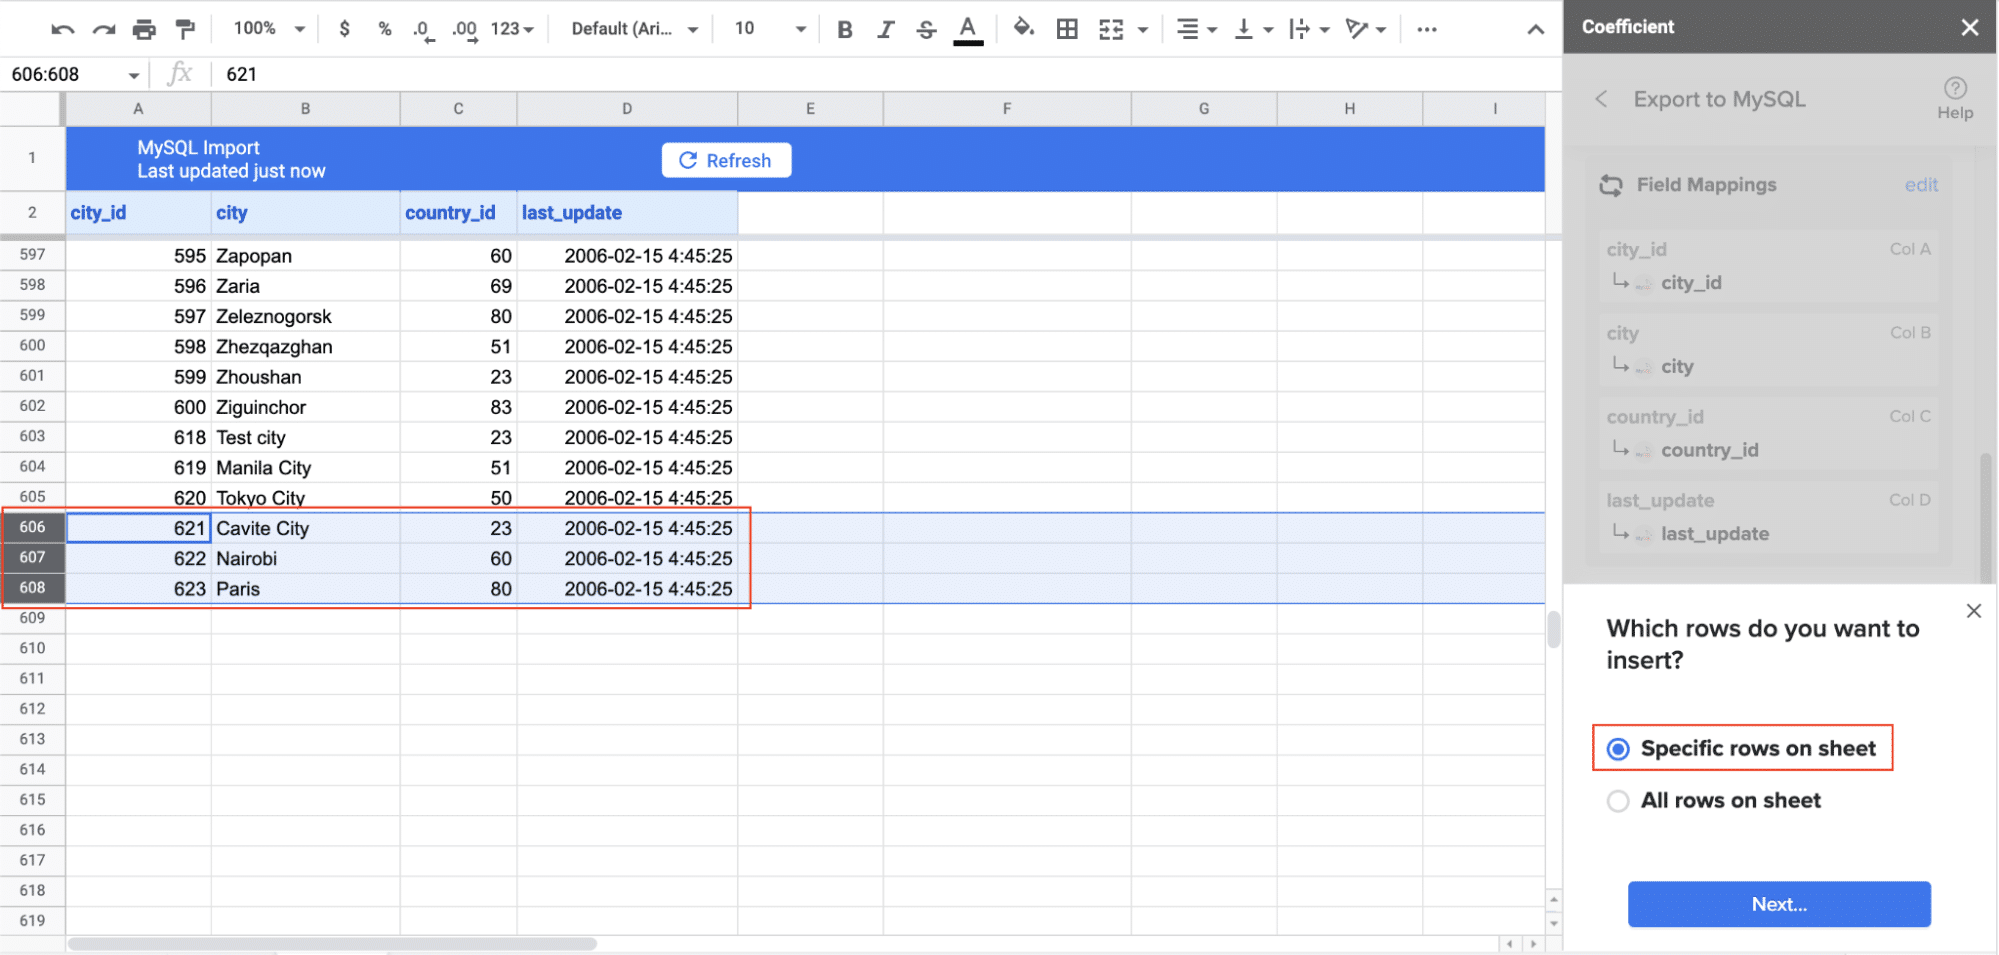 Highlighting specific rows in the sheet to export, or choosing to export all rows.